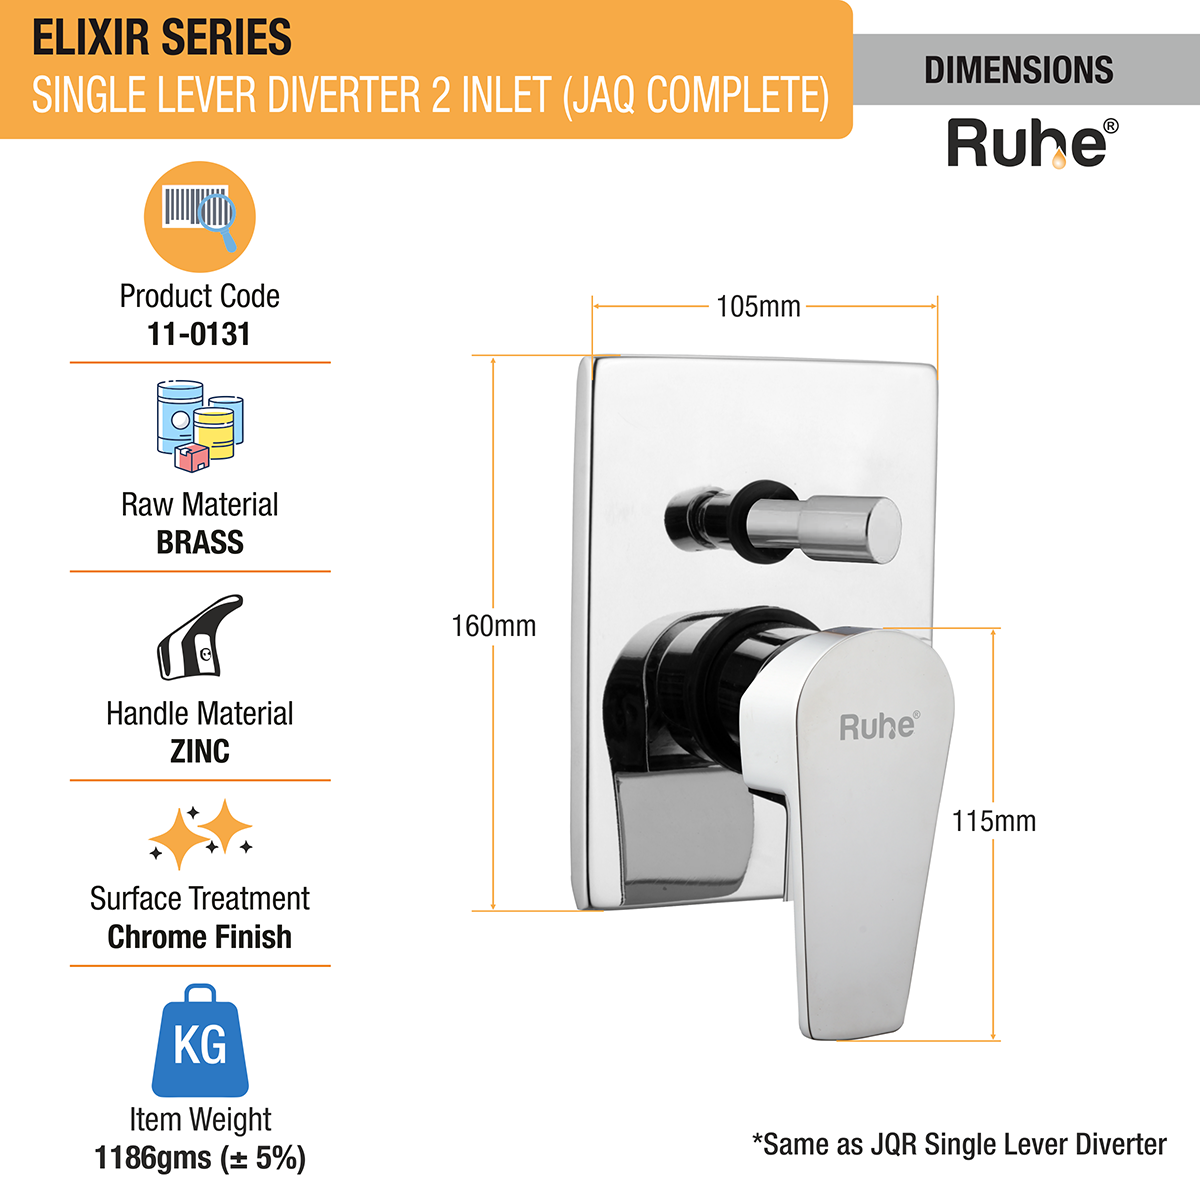 Elixir Single Lever 2-inlet Diverter (JAQ Complete Set) dimensions, raw material, item weight